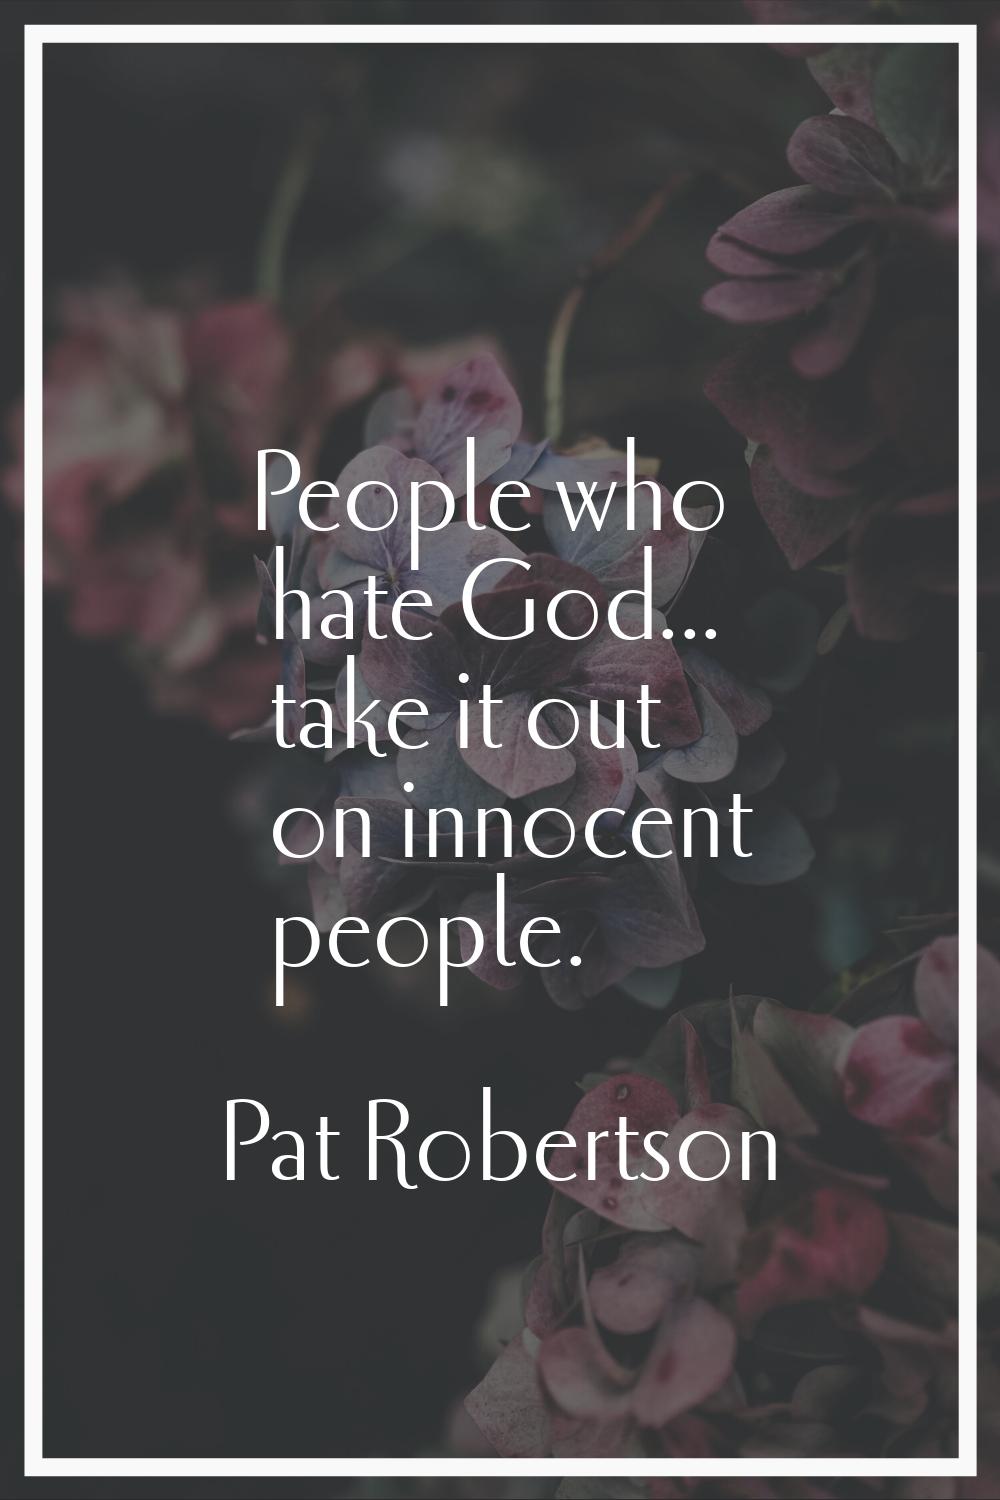 People who hate God... take it out on innocent people.